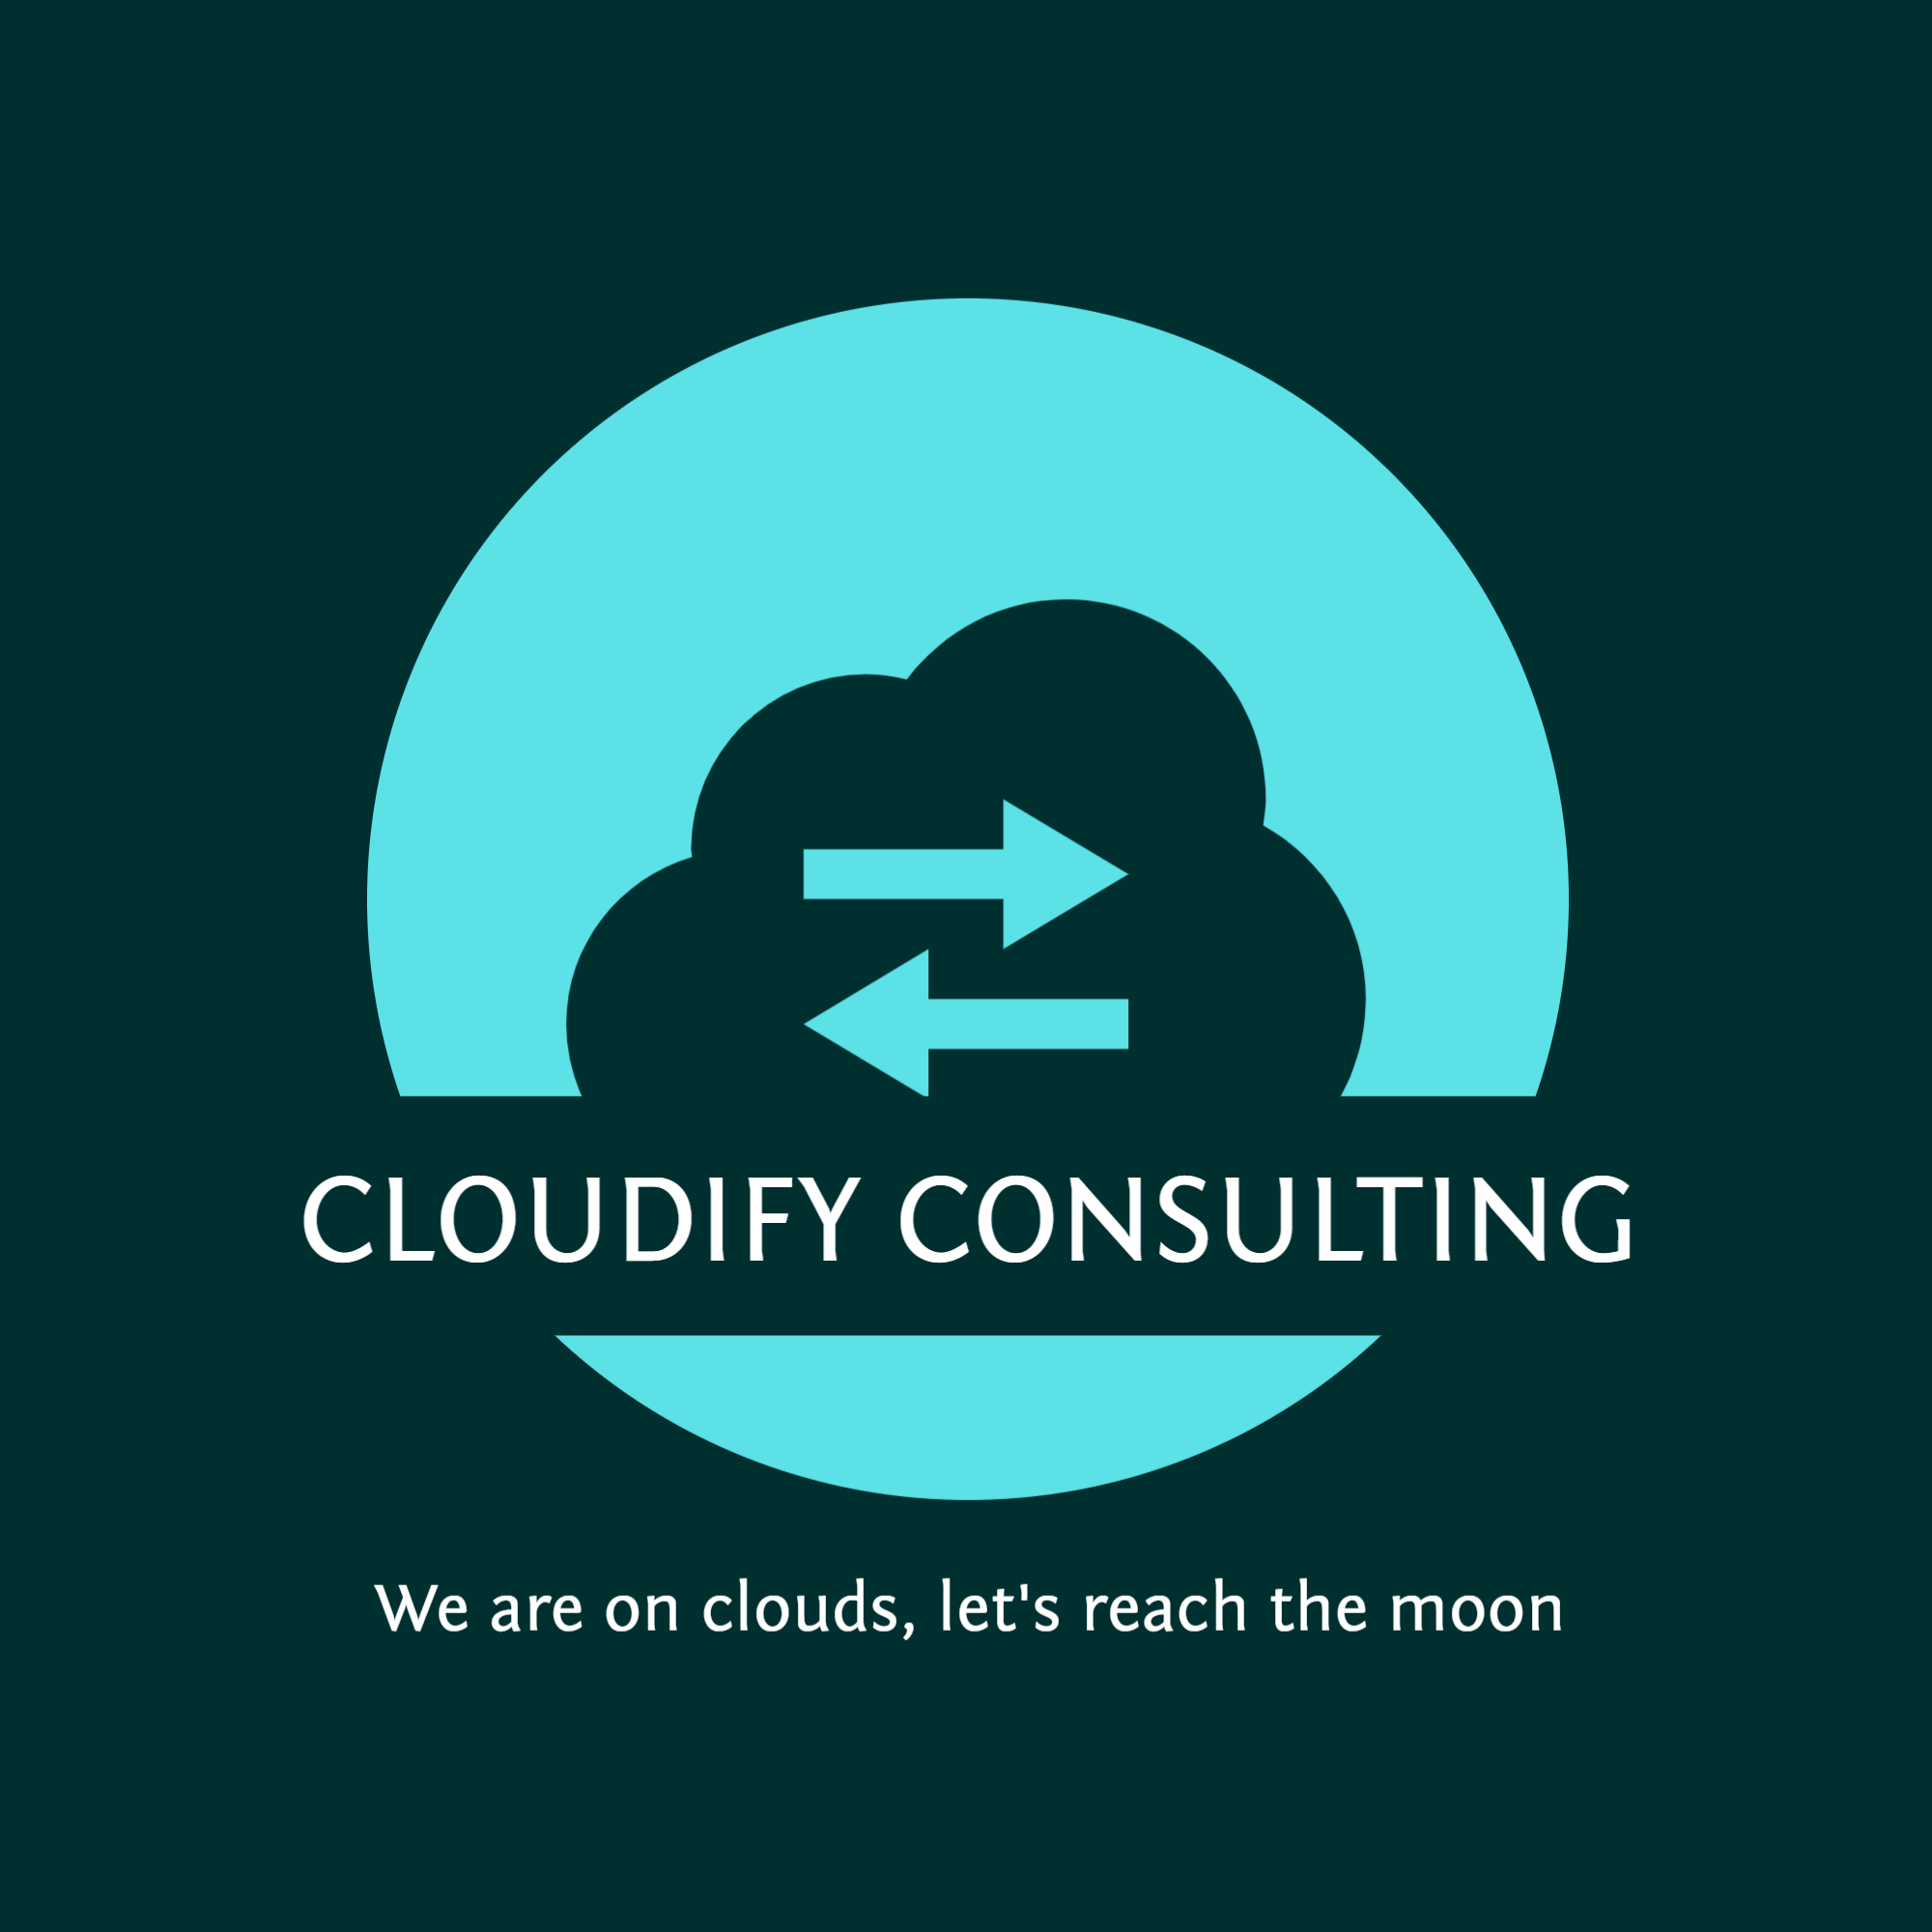 Cloudify Consulting